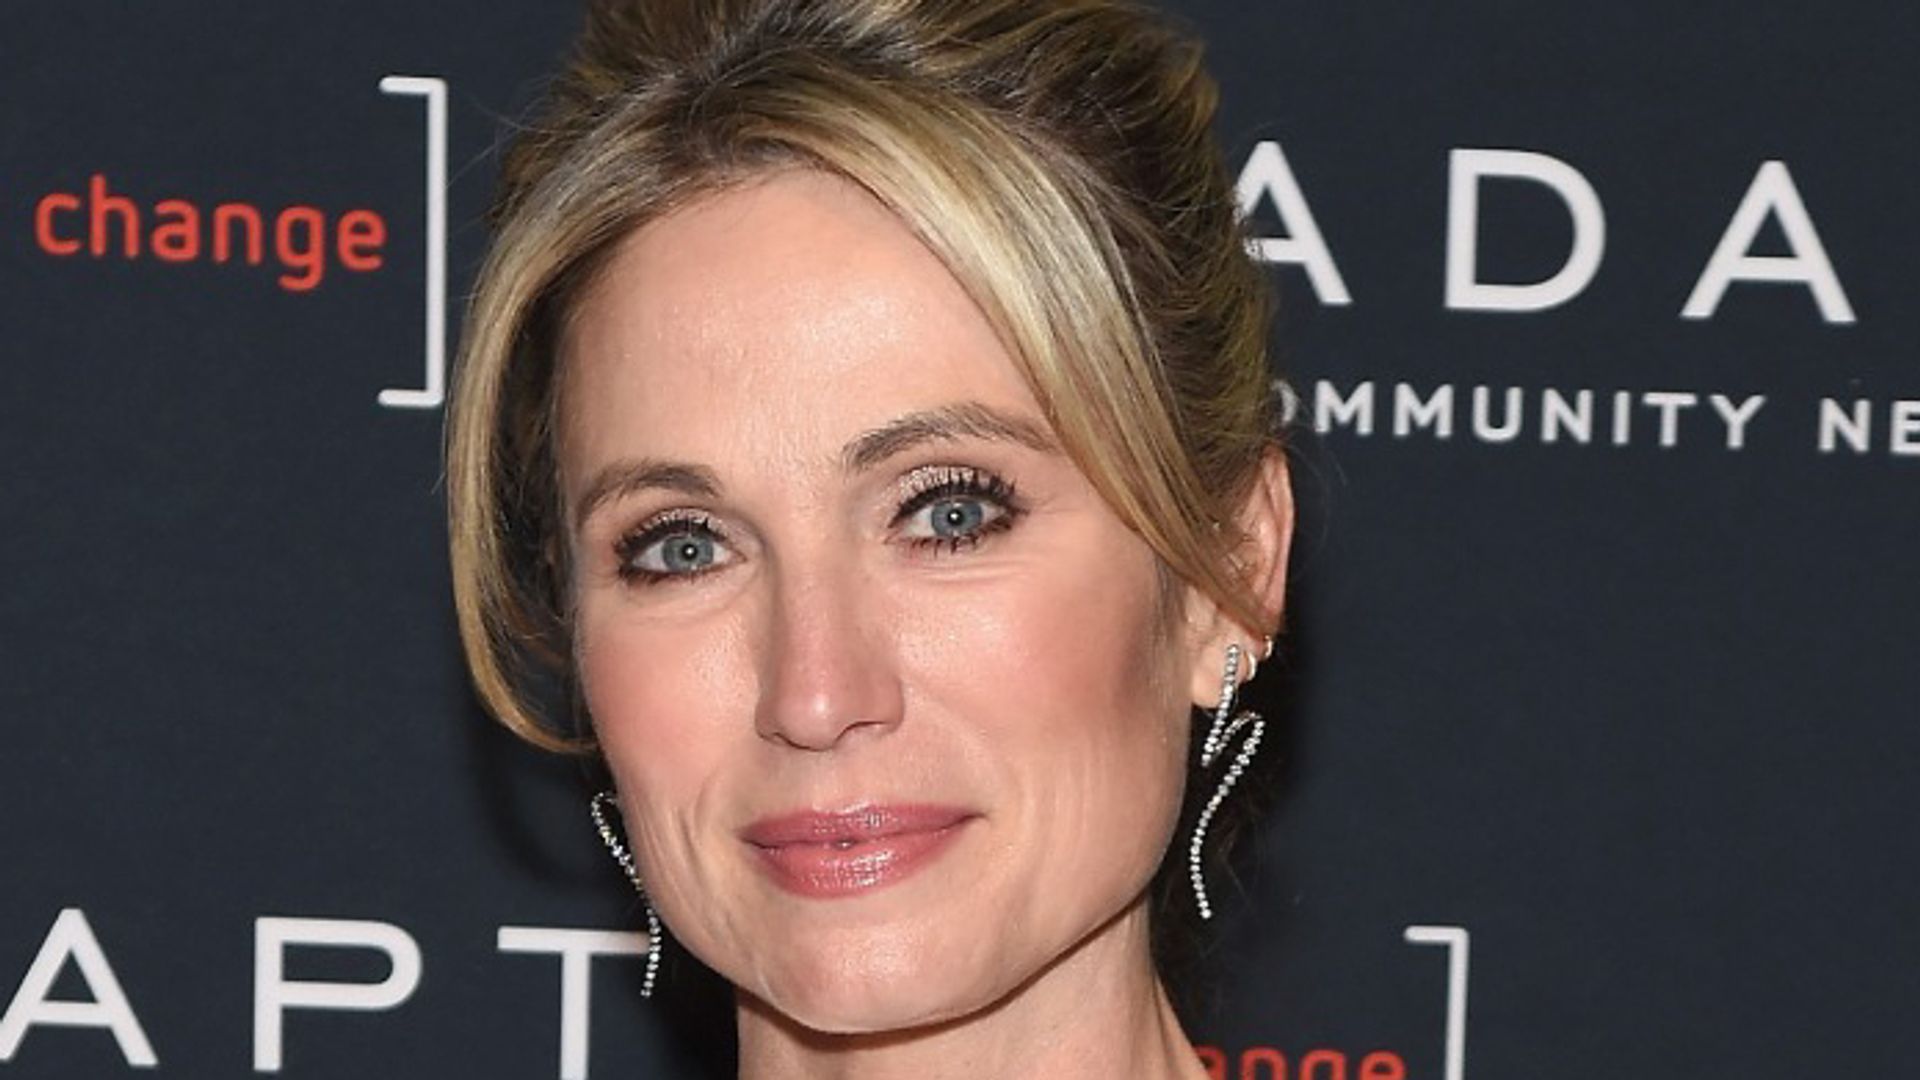 Amy Robach looks glamorous at community event